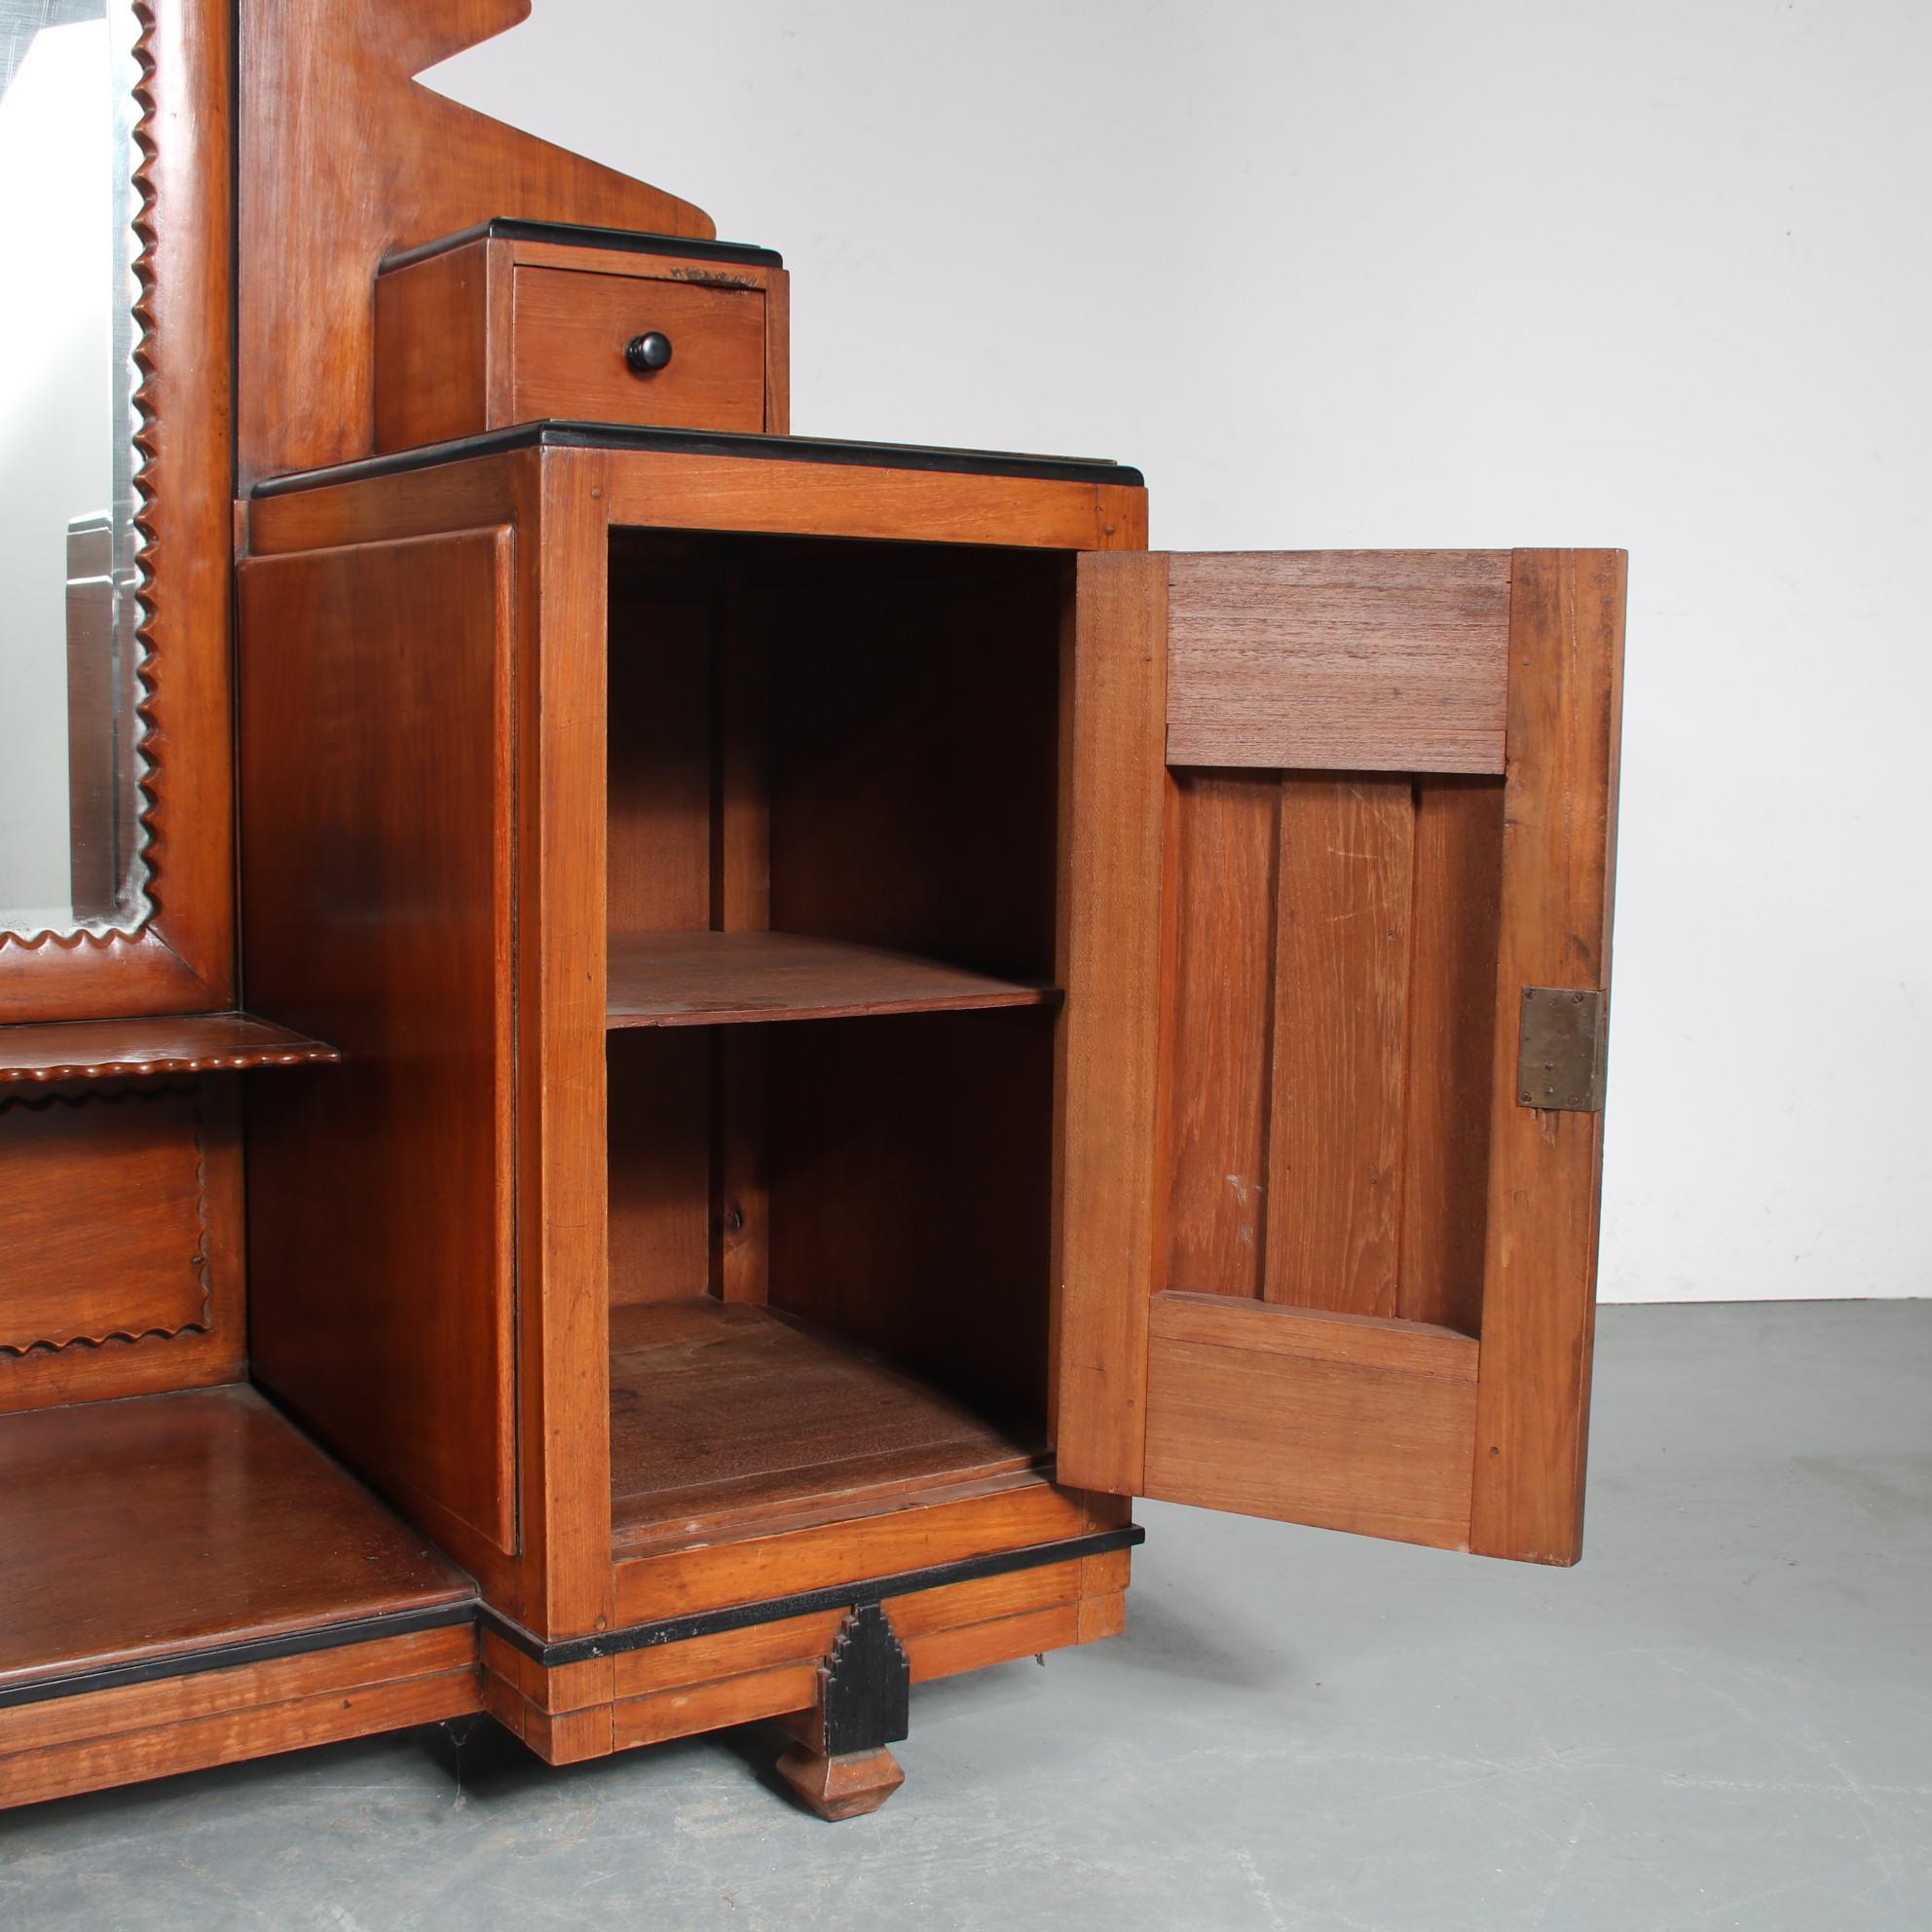 Colonial Dressing Table in Amsterdam School Style, Indonesia, 1920 For Sale 6